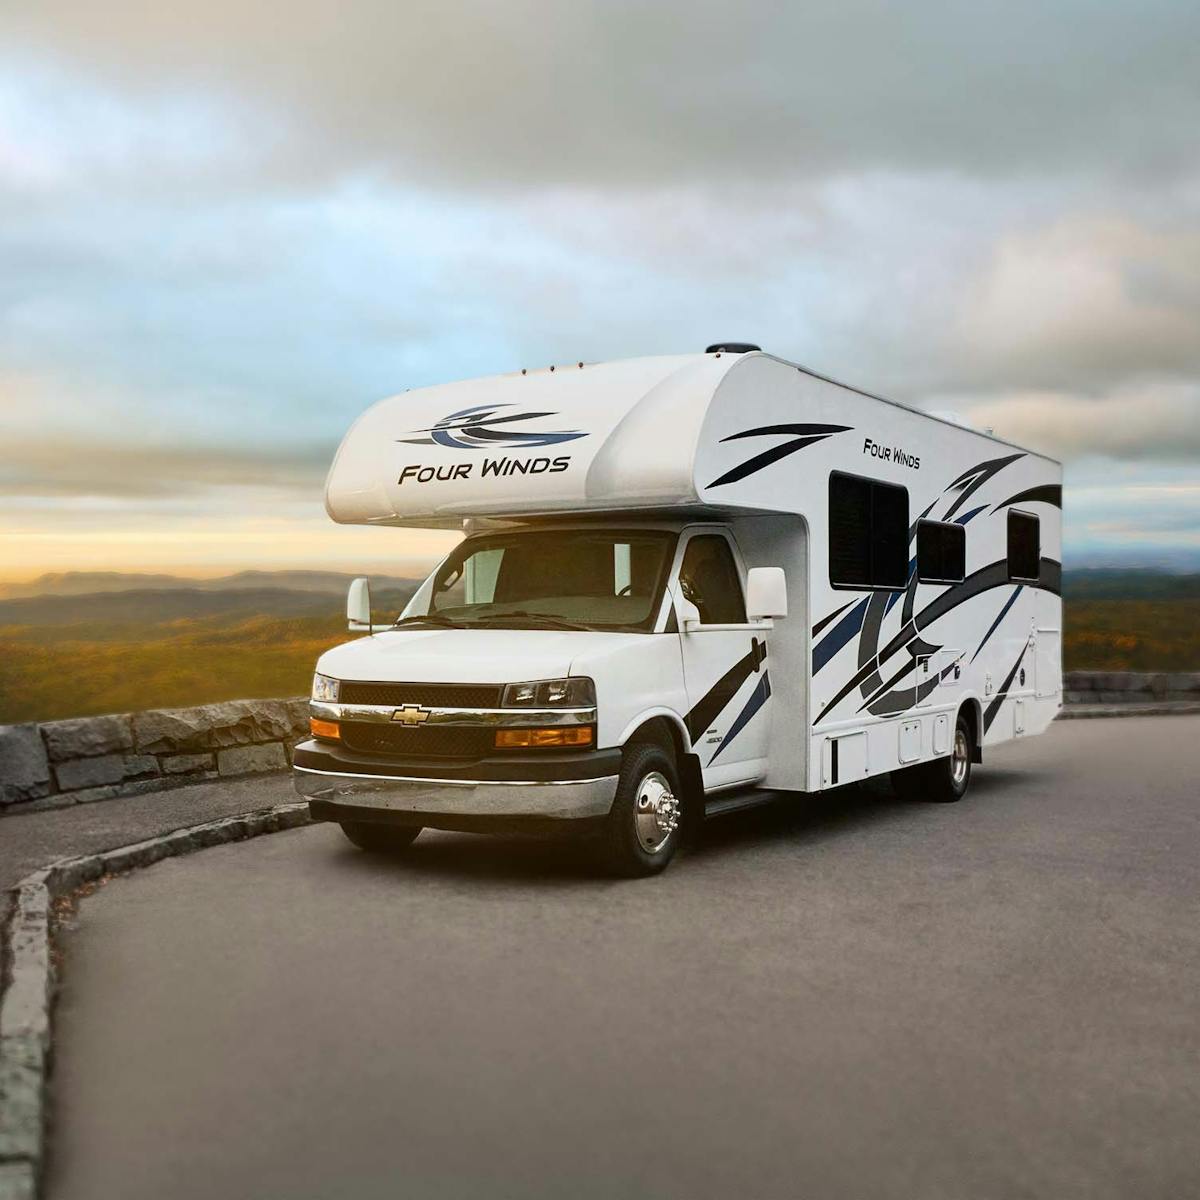 2022 Thor Four Winds Class C RV Lifestyle Tennessee shoot